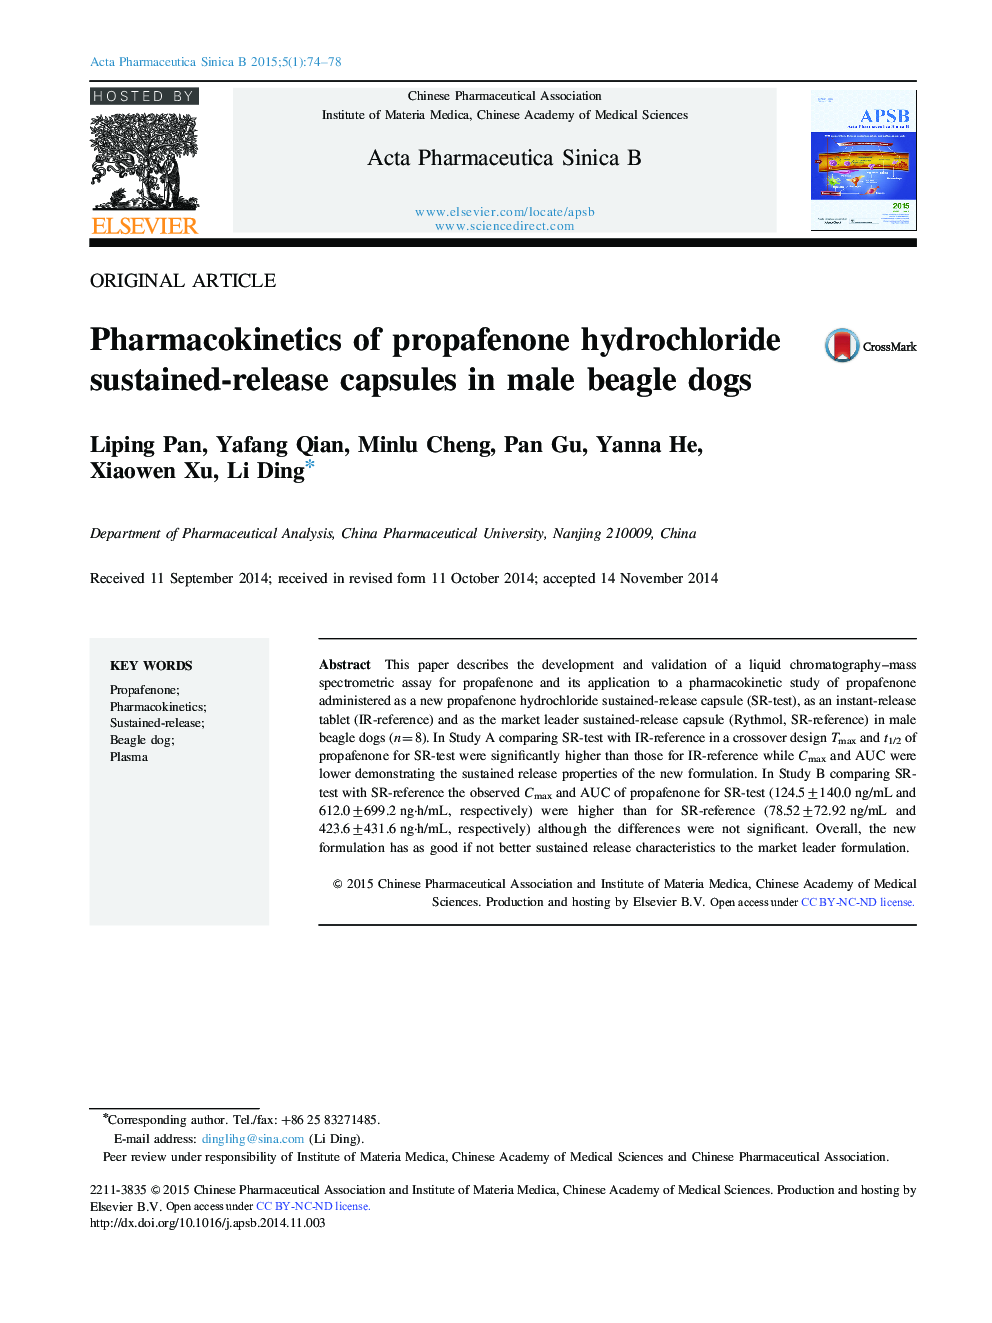 Pharmacokinetics of propafenone hydrochloride sustained-release capsules in male beagle dogs 